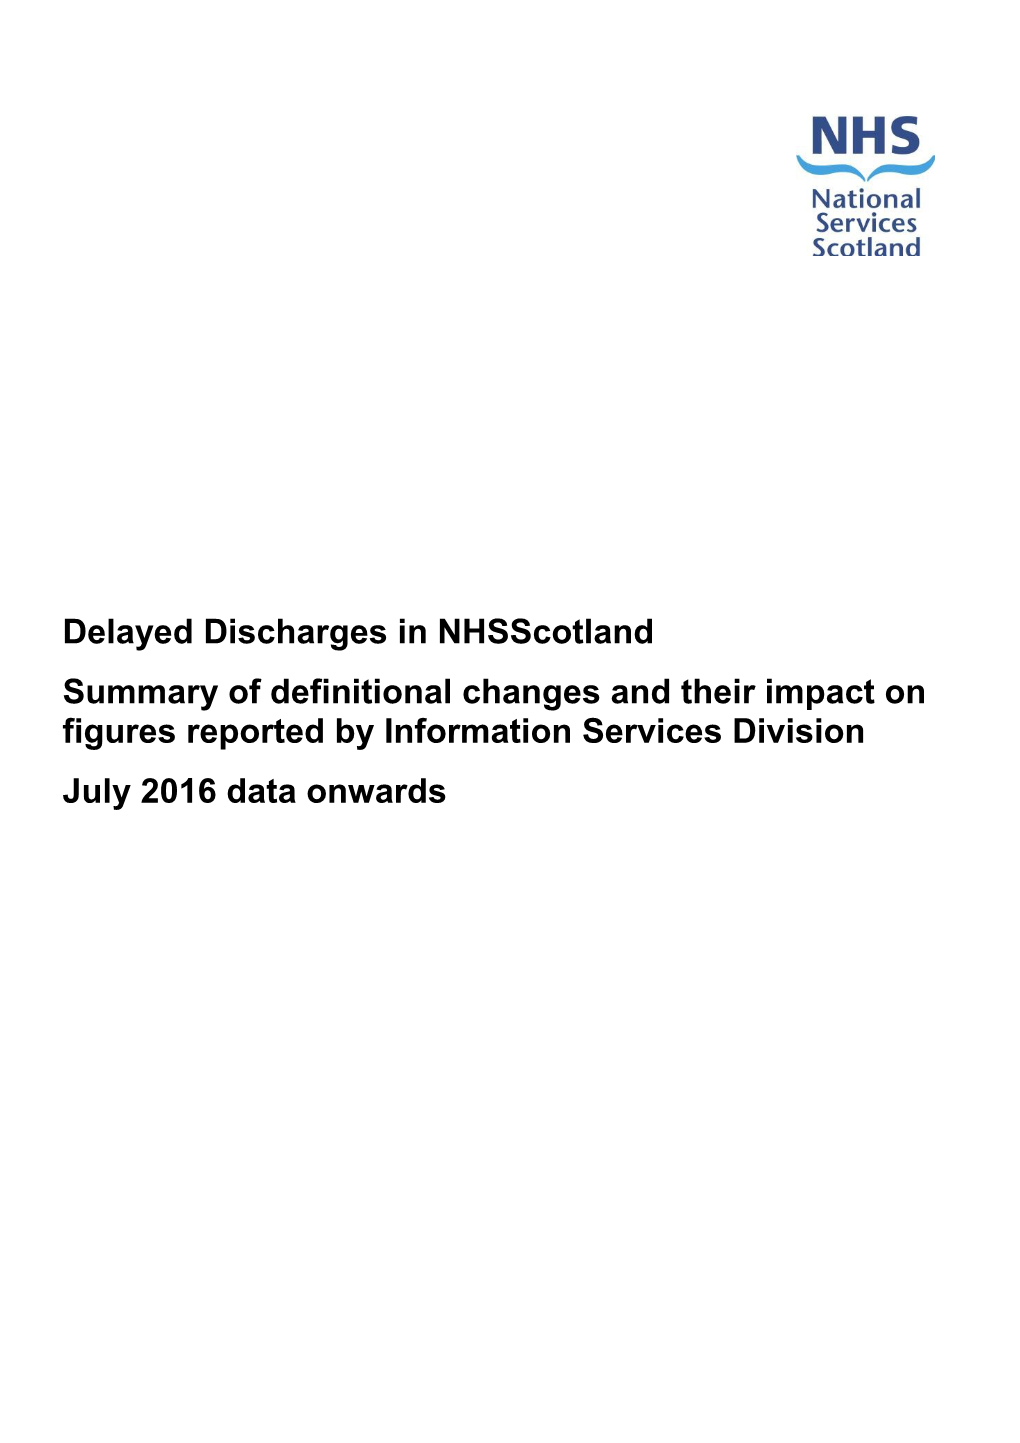 Summary of Definitional Changes and Their Impact on Figures Reported by Information Services